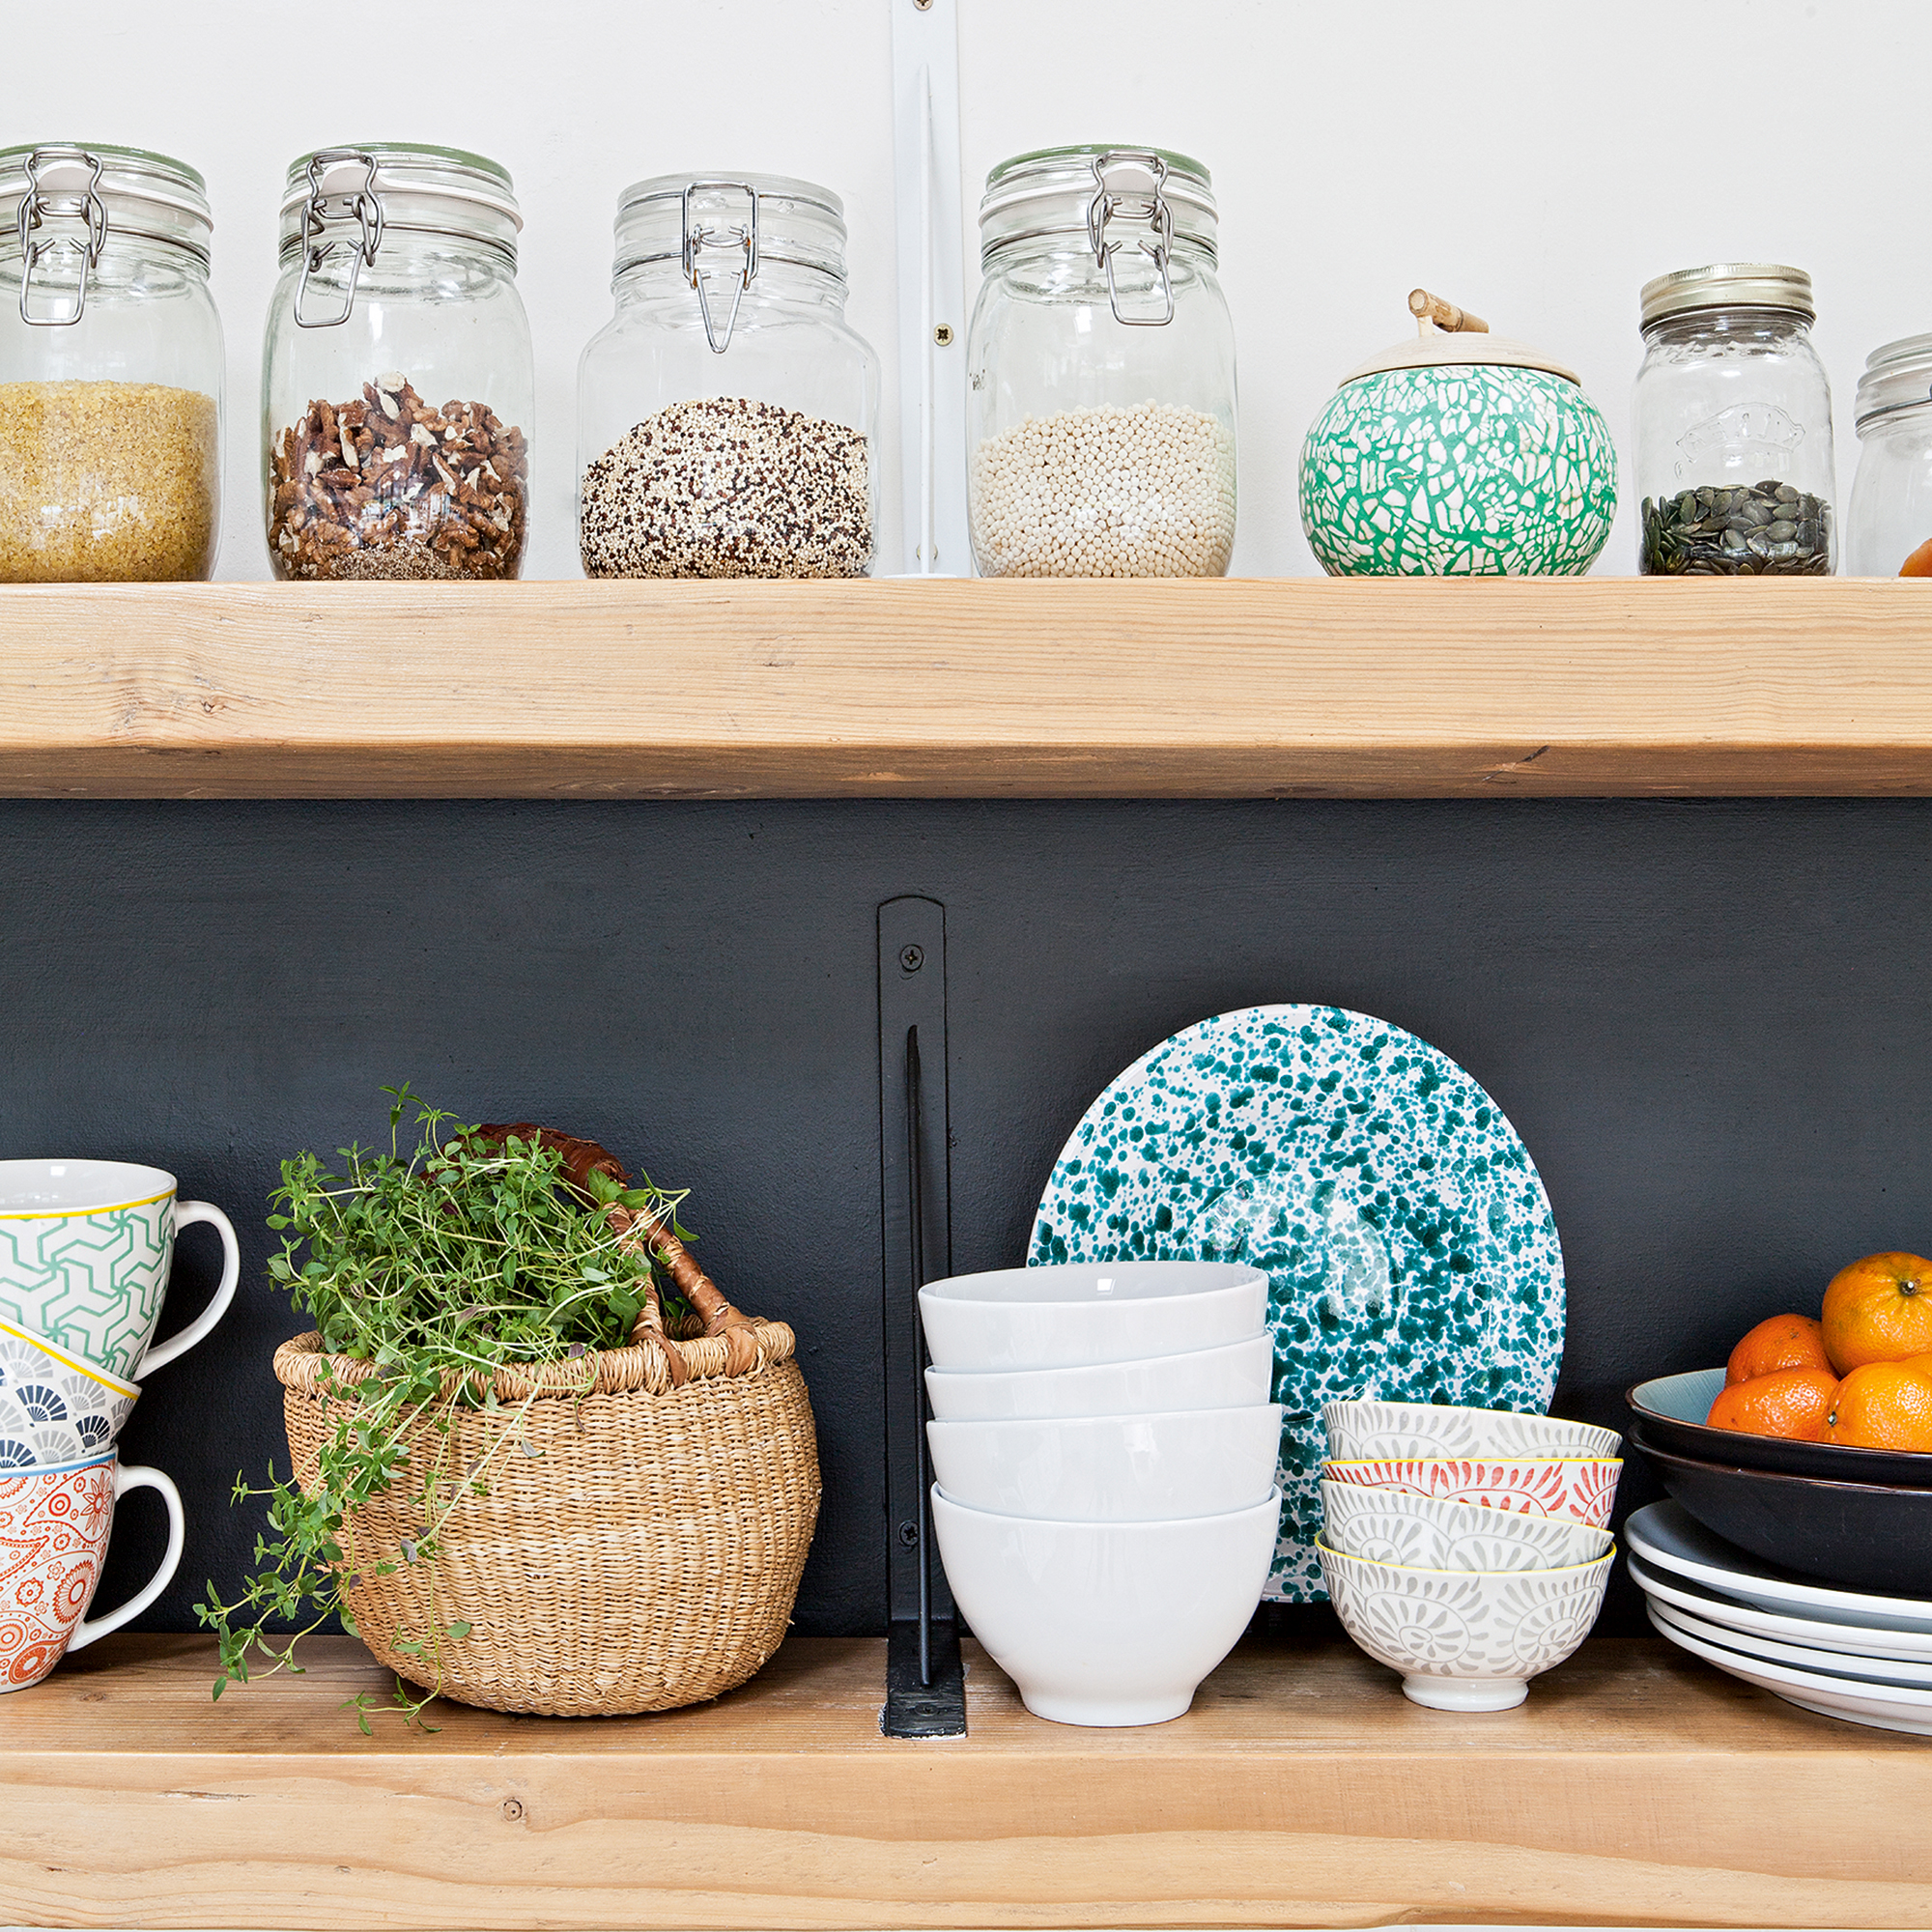 Open kitchen shelving with jars of grains and collection of mugs, bowls and plates